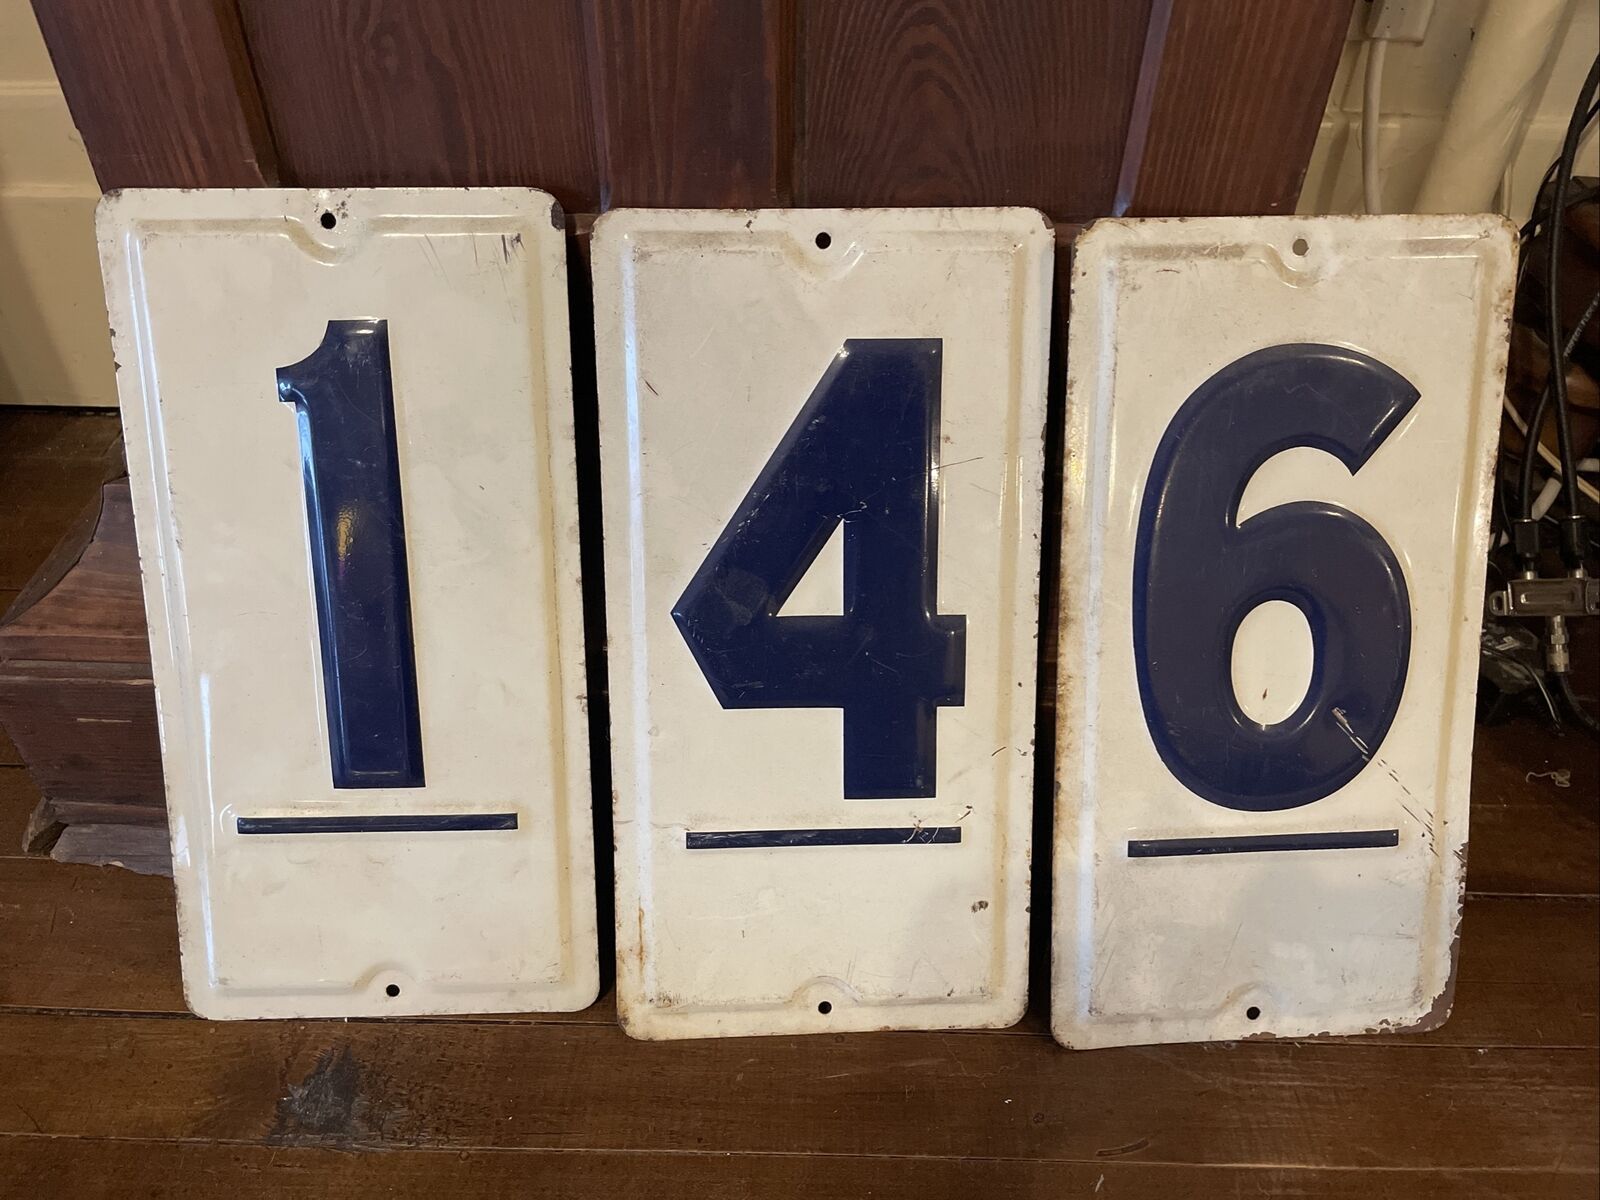 Vintage Embossed Gas Station Numbers 1, 4, and 6,  14.5” x 7.5”